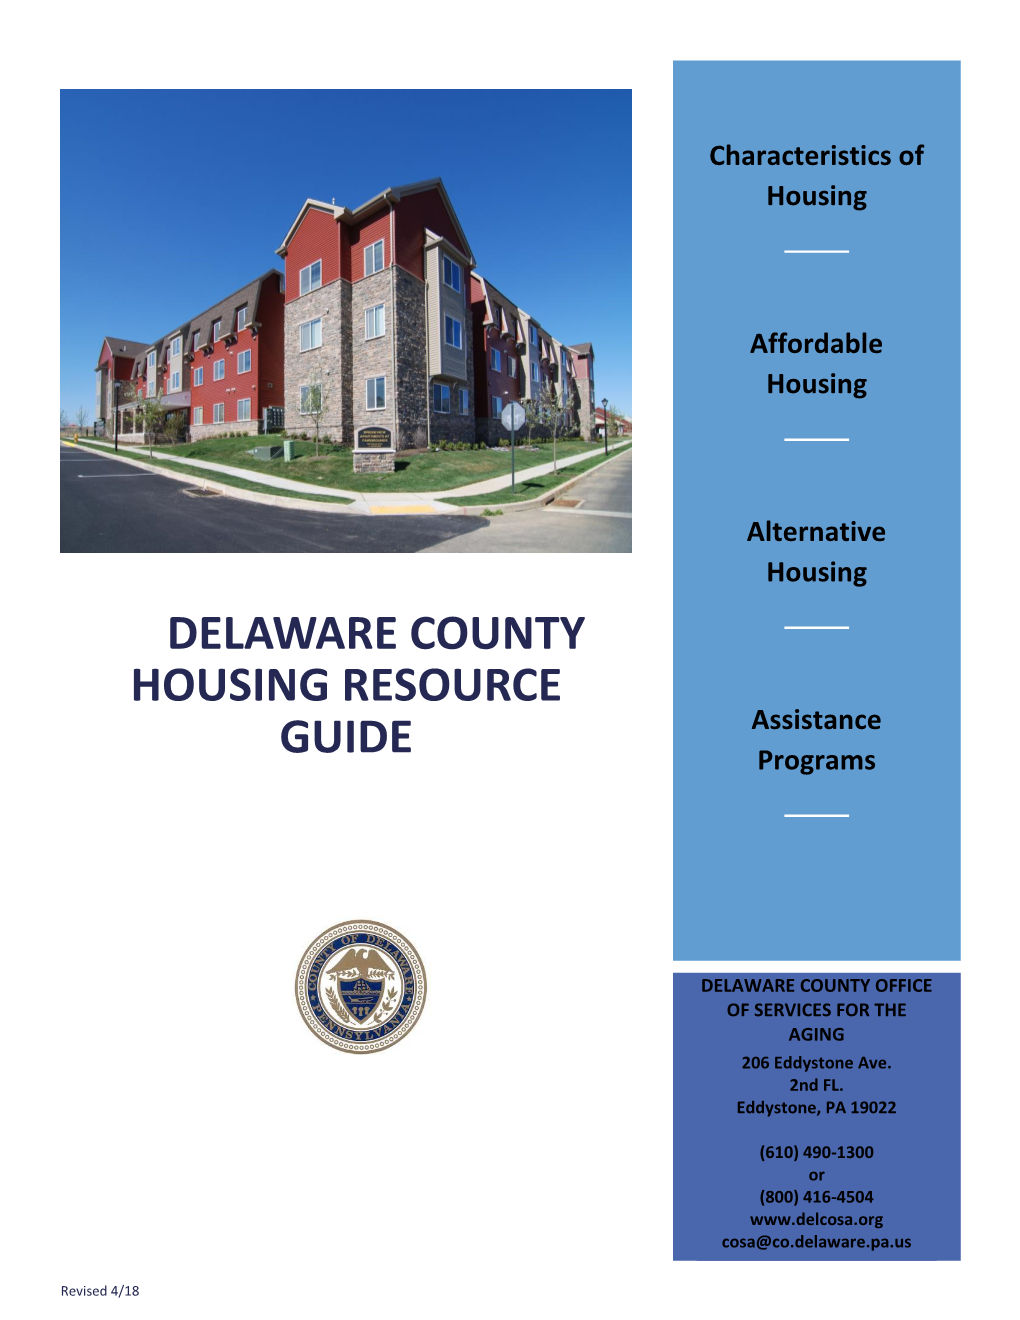 Delaware County Housing Resource Guide